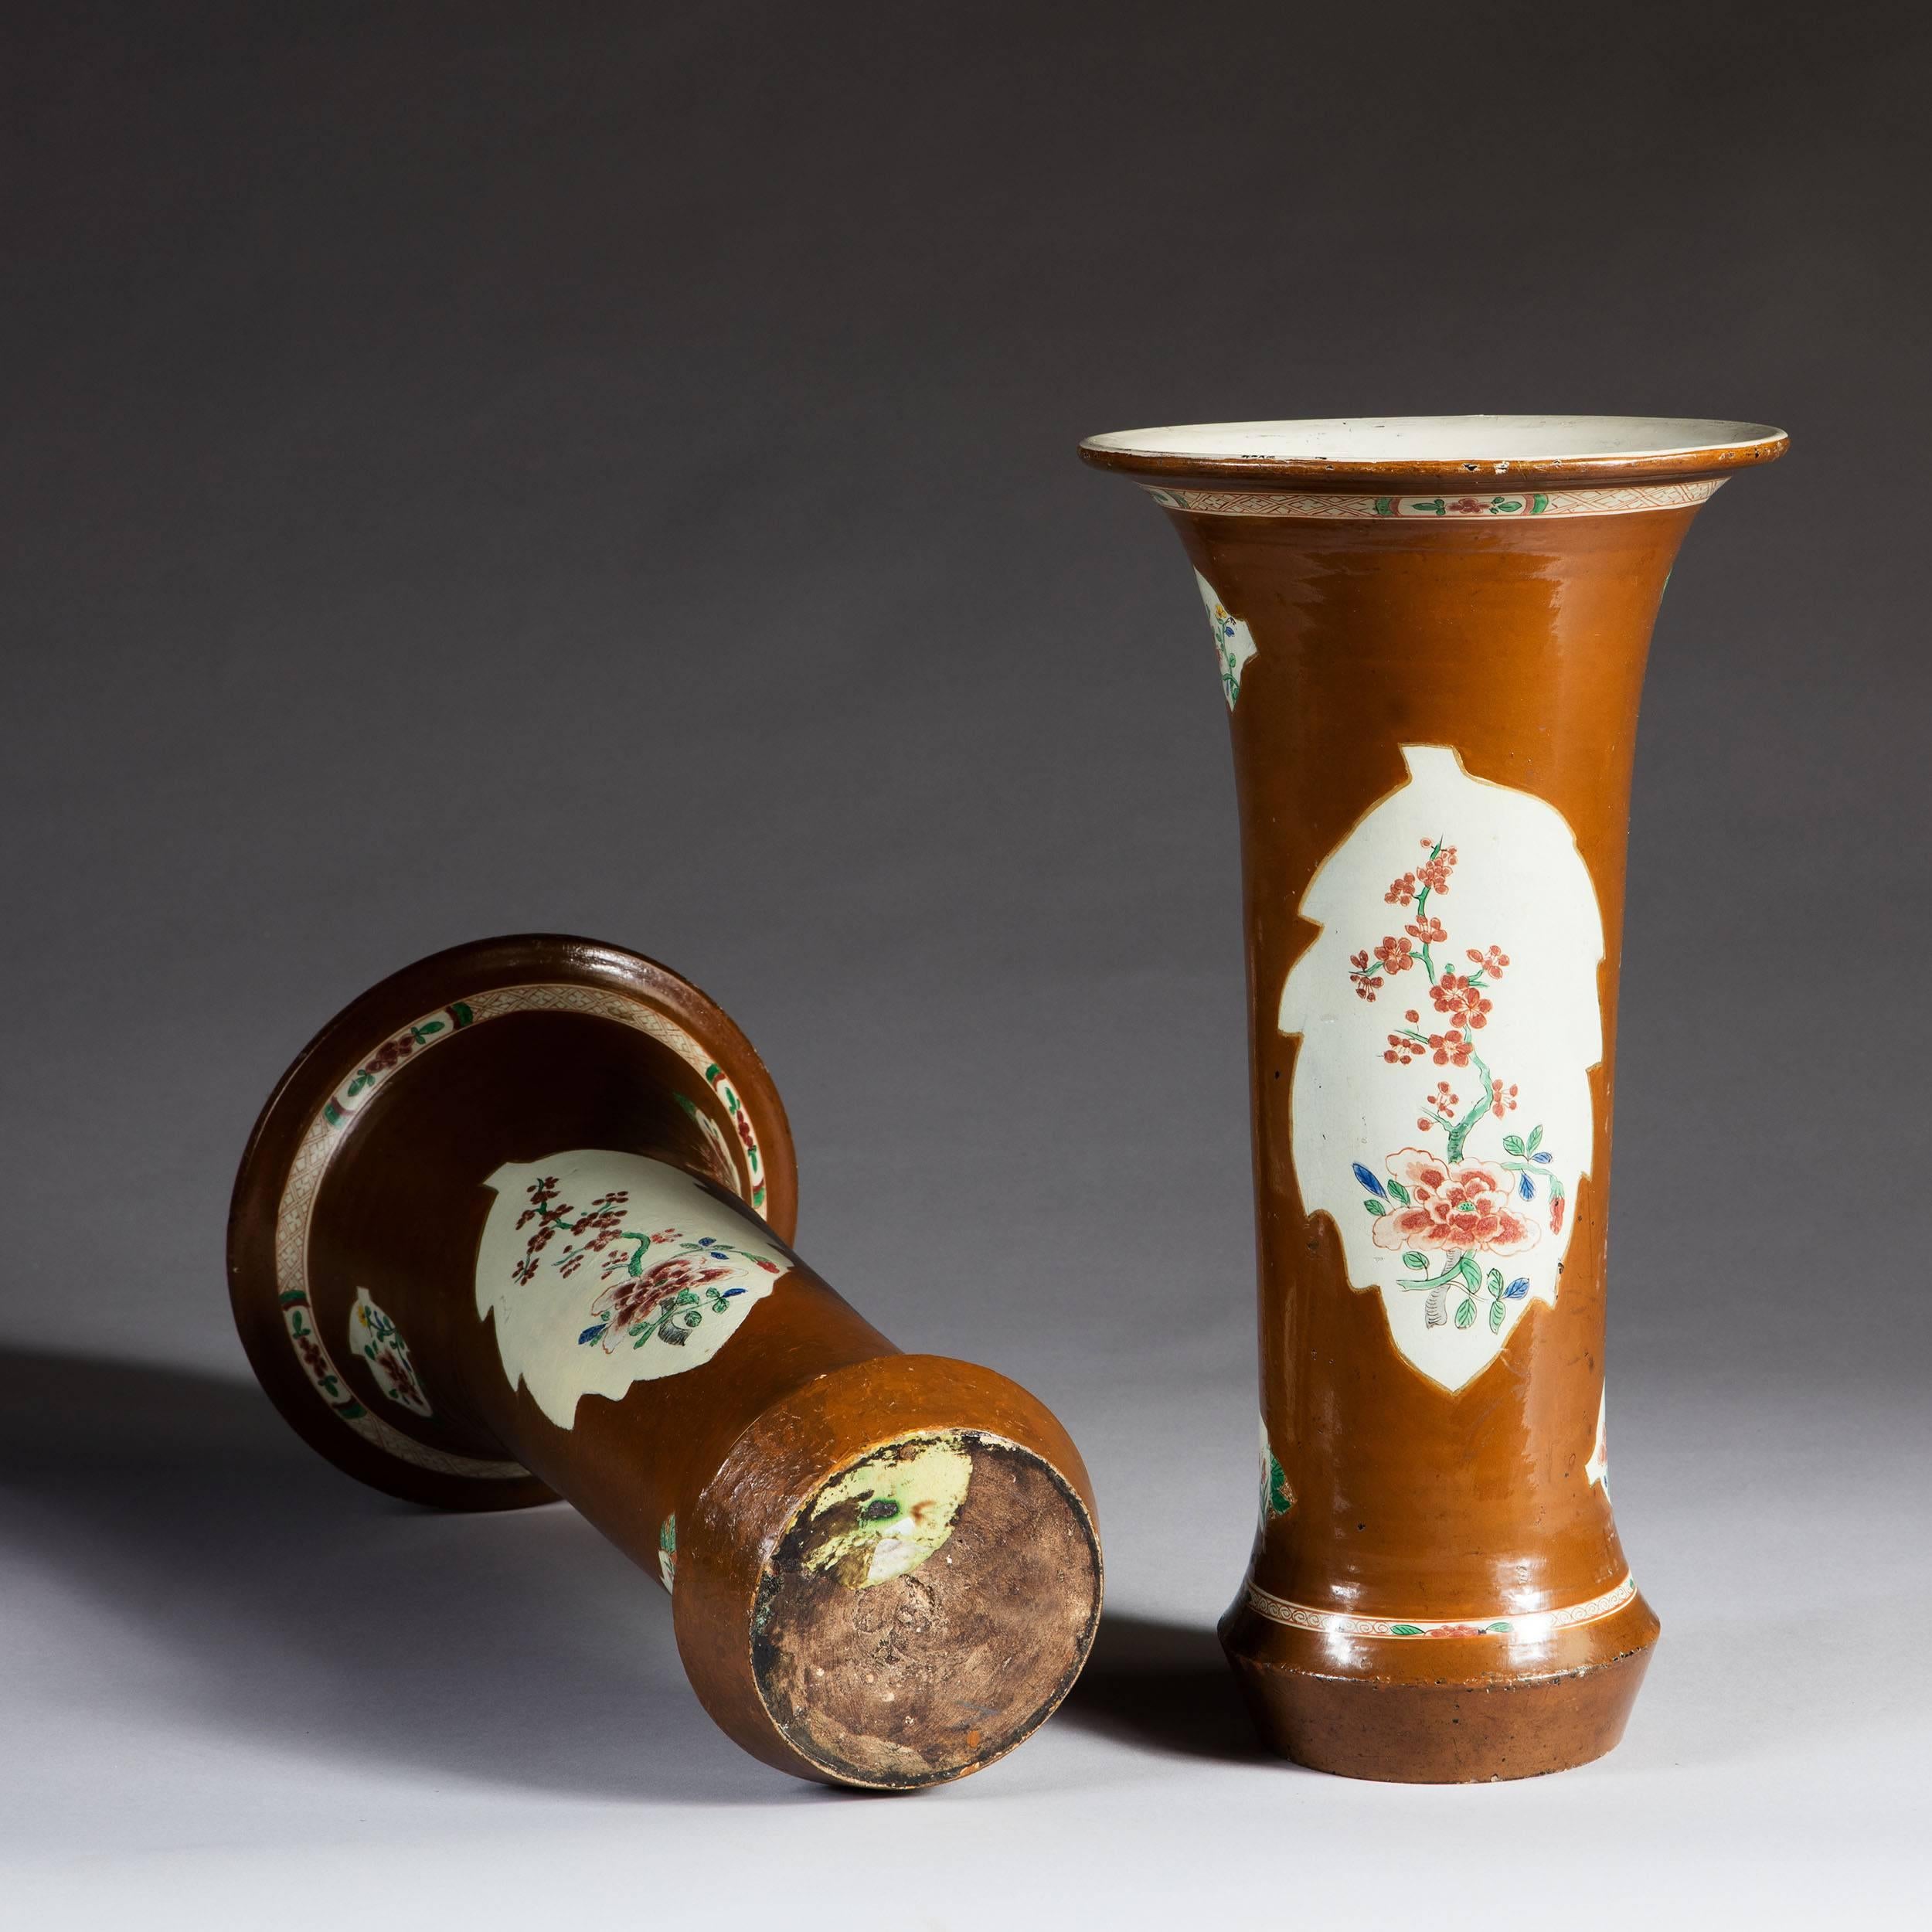 Pair of Japanned Berlin Chinoiserie Wucai Batavia Trumpet Vases In Excellent Condition In London, by appointment only